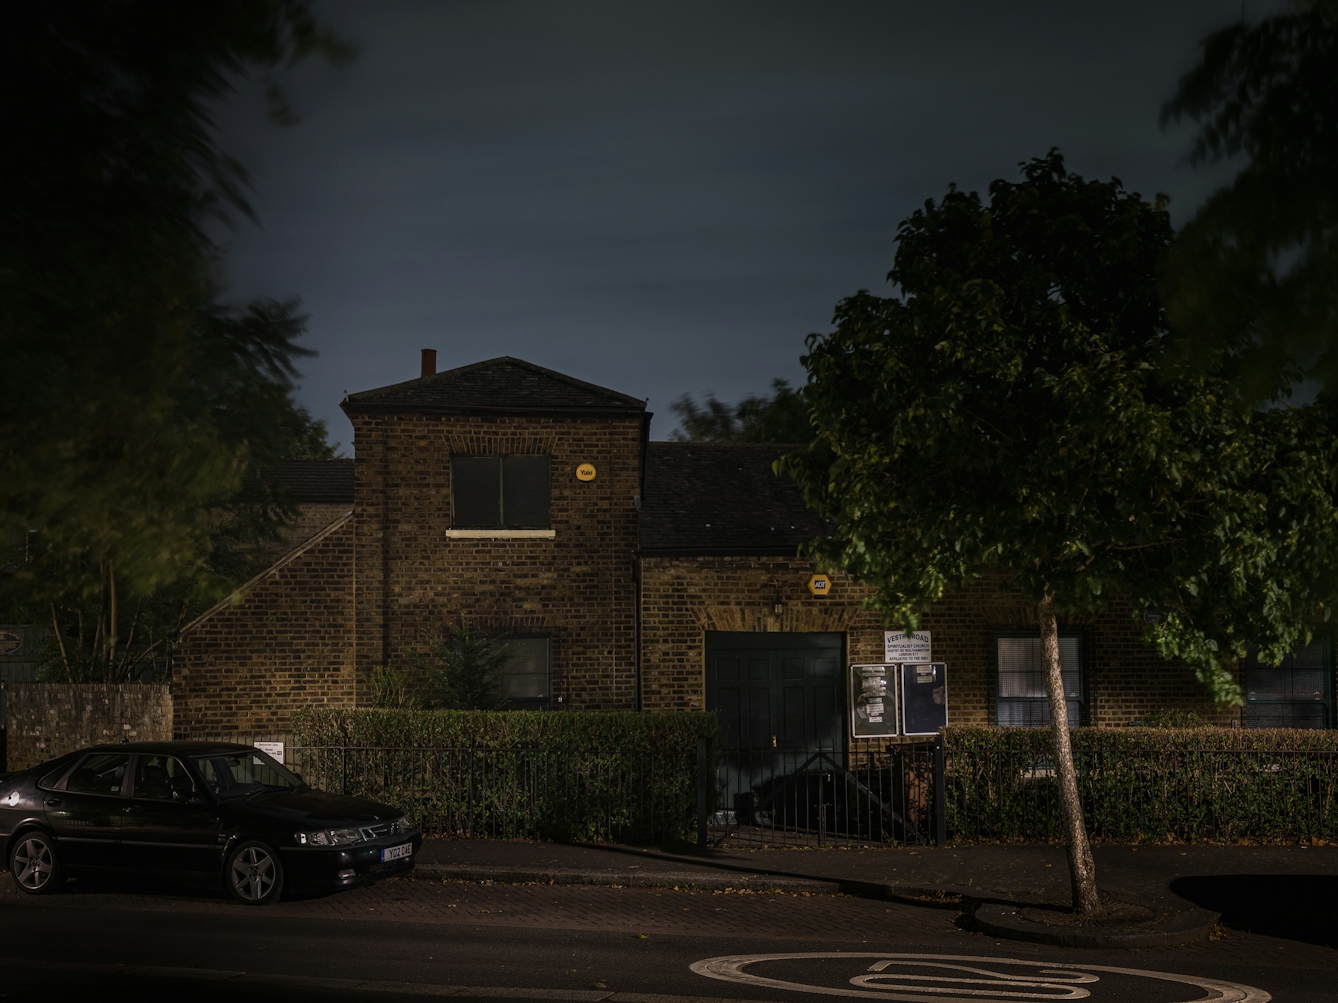 Photograph of the National Spiritualist Church, Walthamstow, at night.  The building is set amongst dense foliage with very little light making its way onto the facade of the exposed brick building.  A single car can be seen in the foreground,